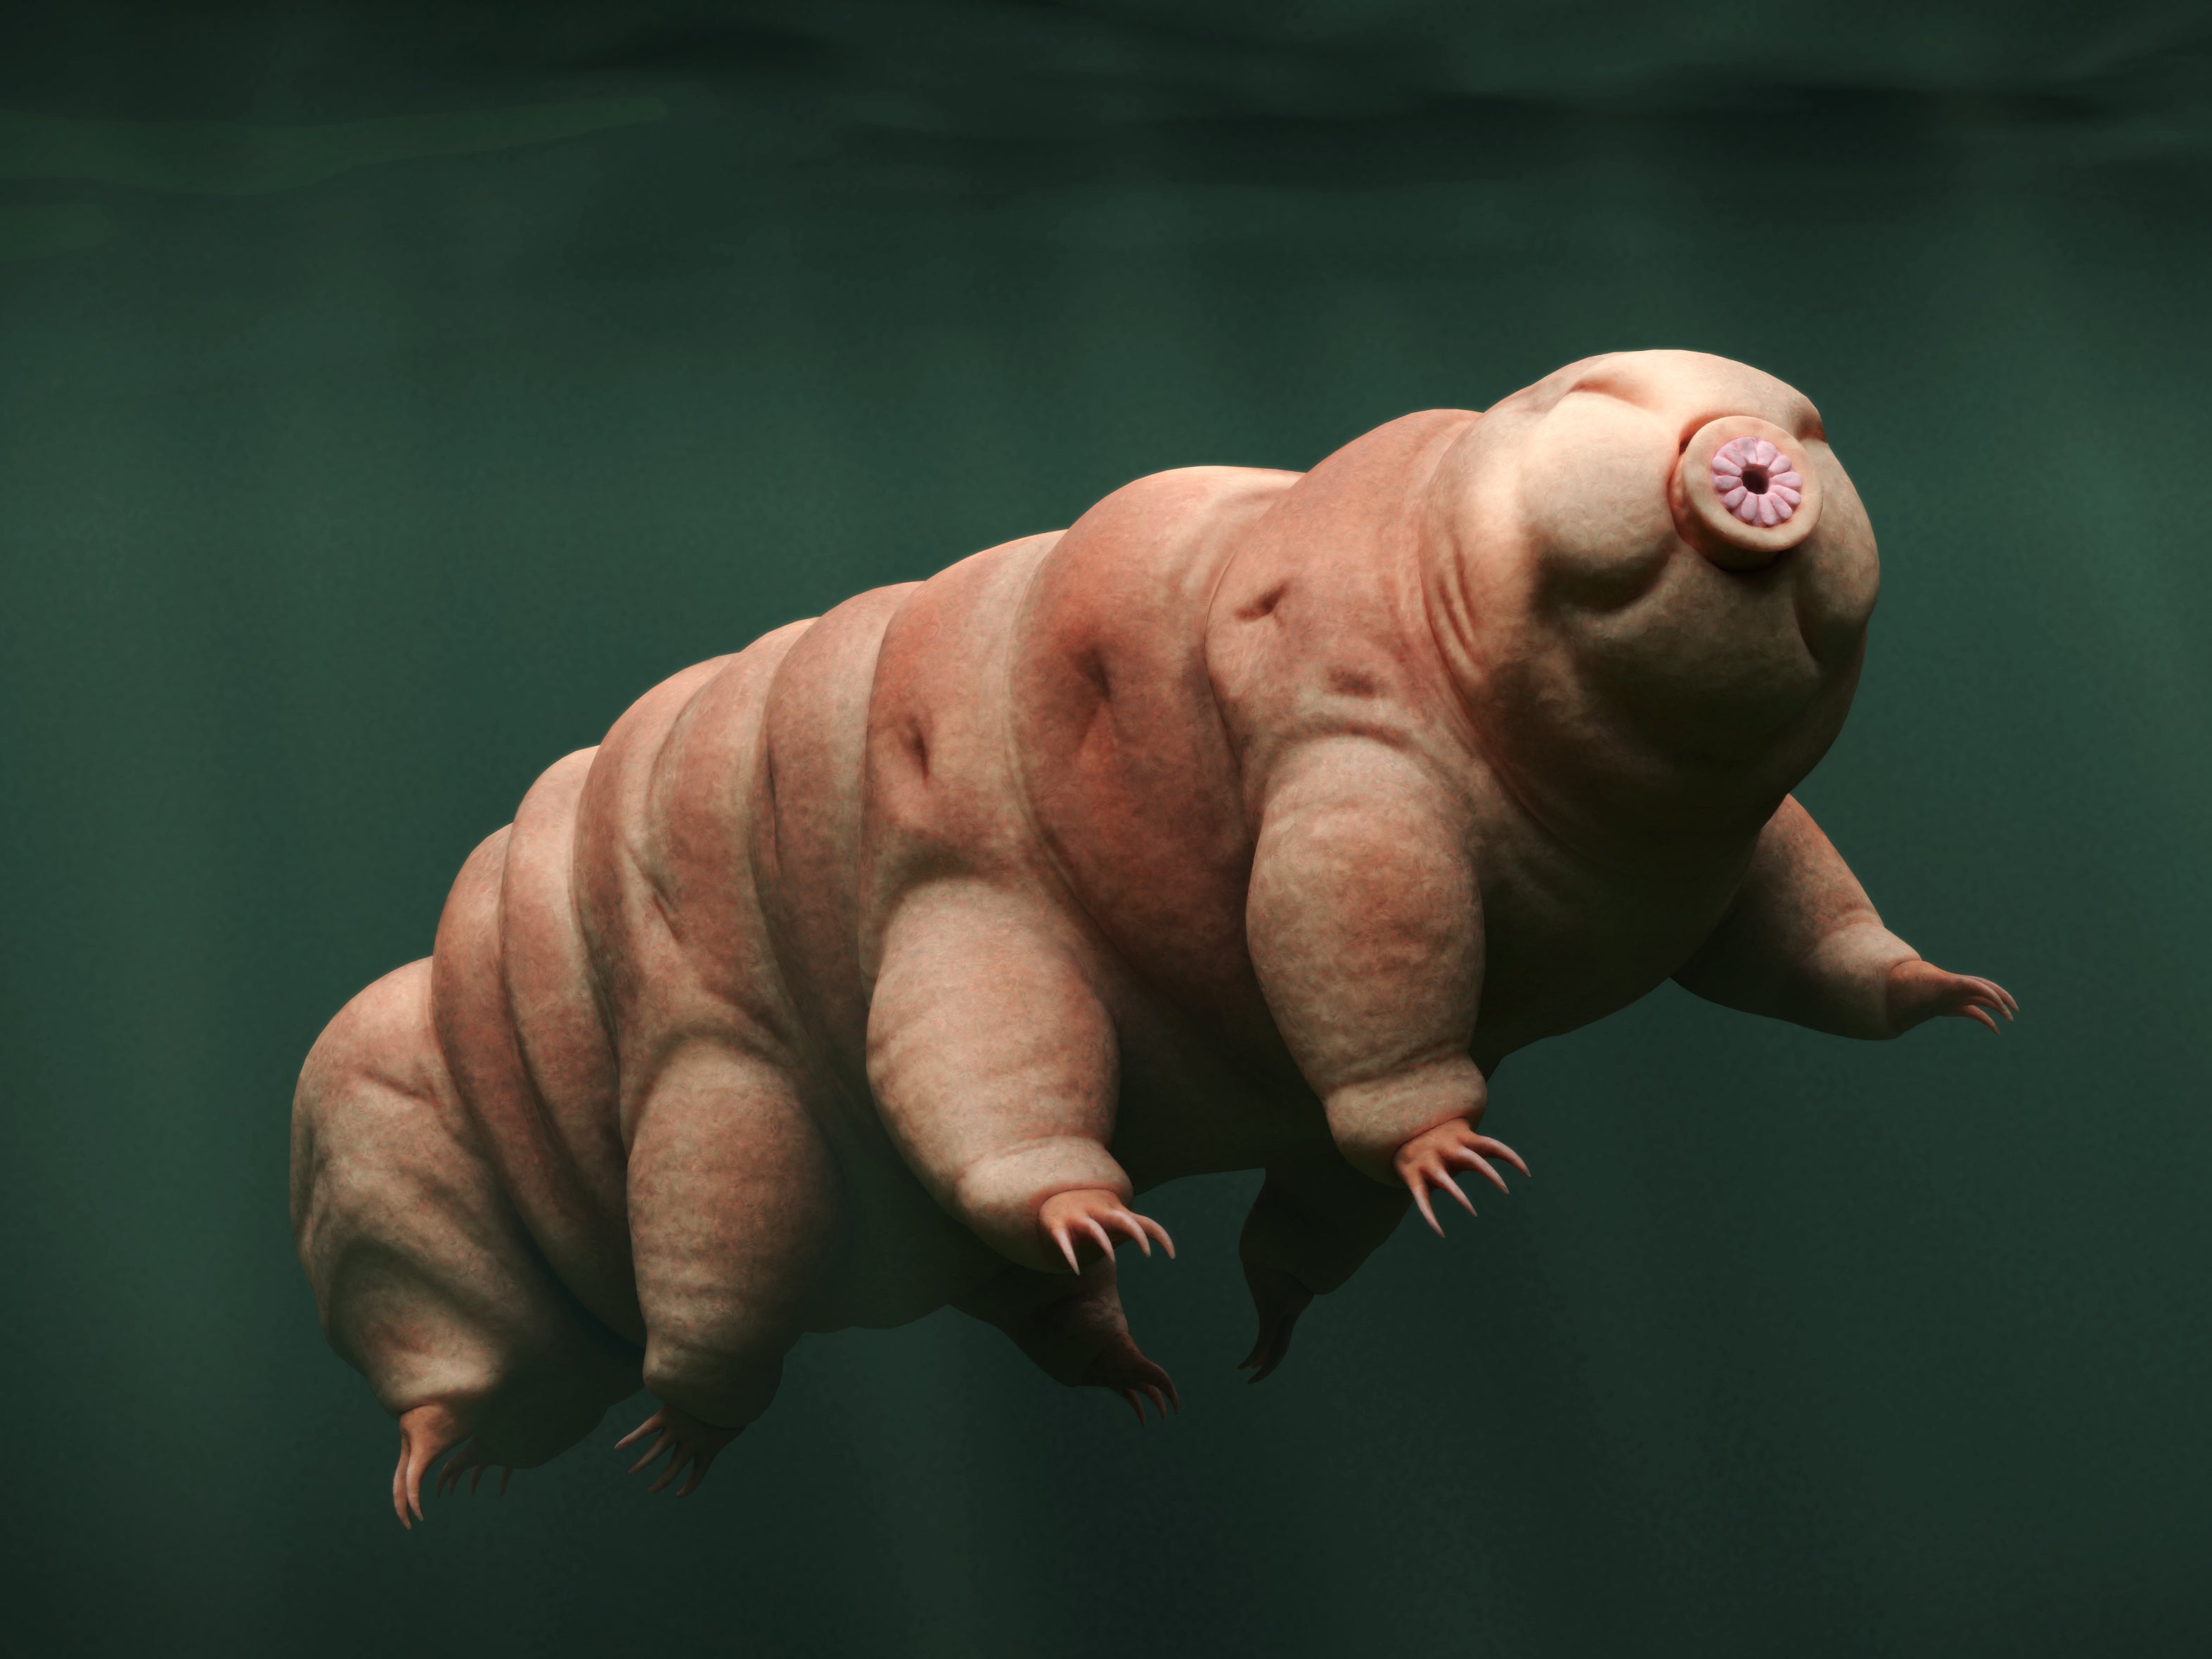 Tardigrades measure, on average, around 0.5mm in length and are almost entirely translucent